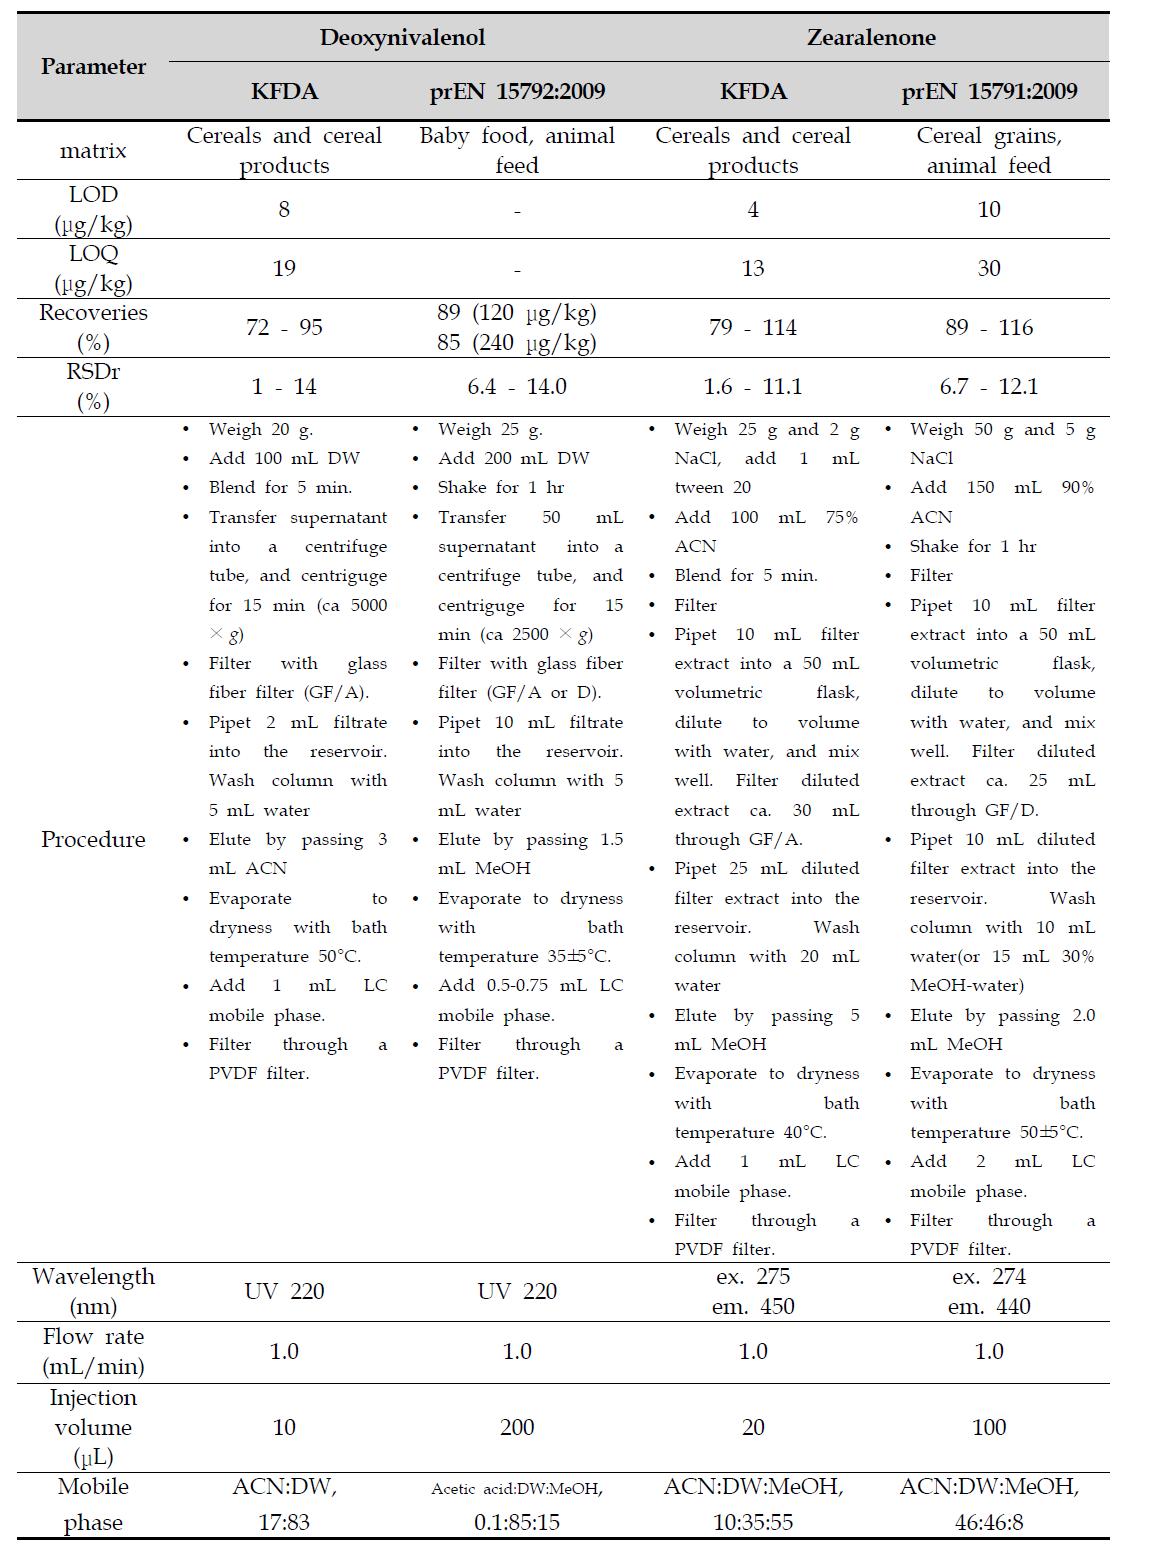 Comparison of analysis method for deoxynivalenol and zearalenone